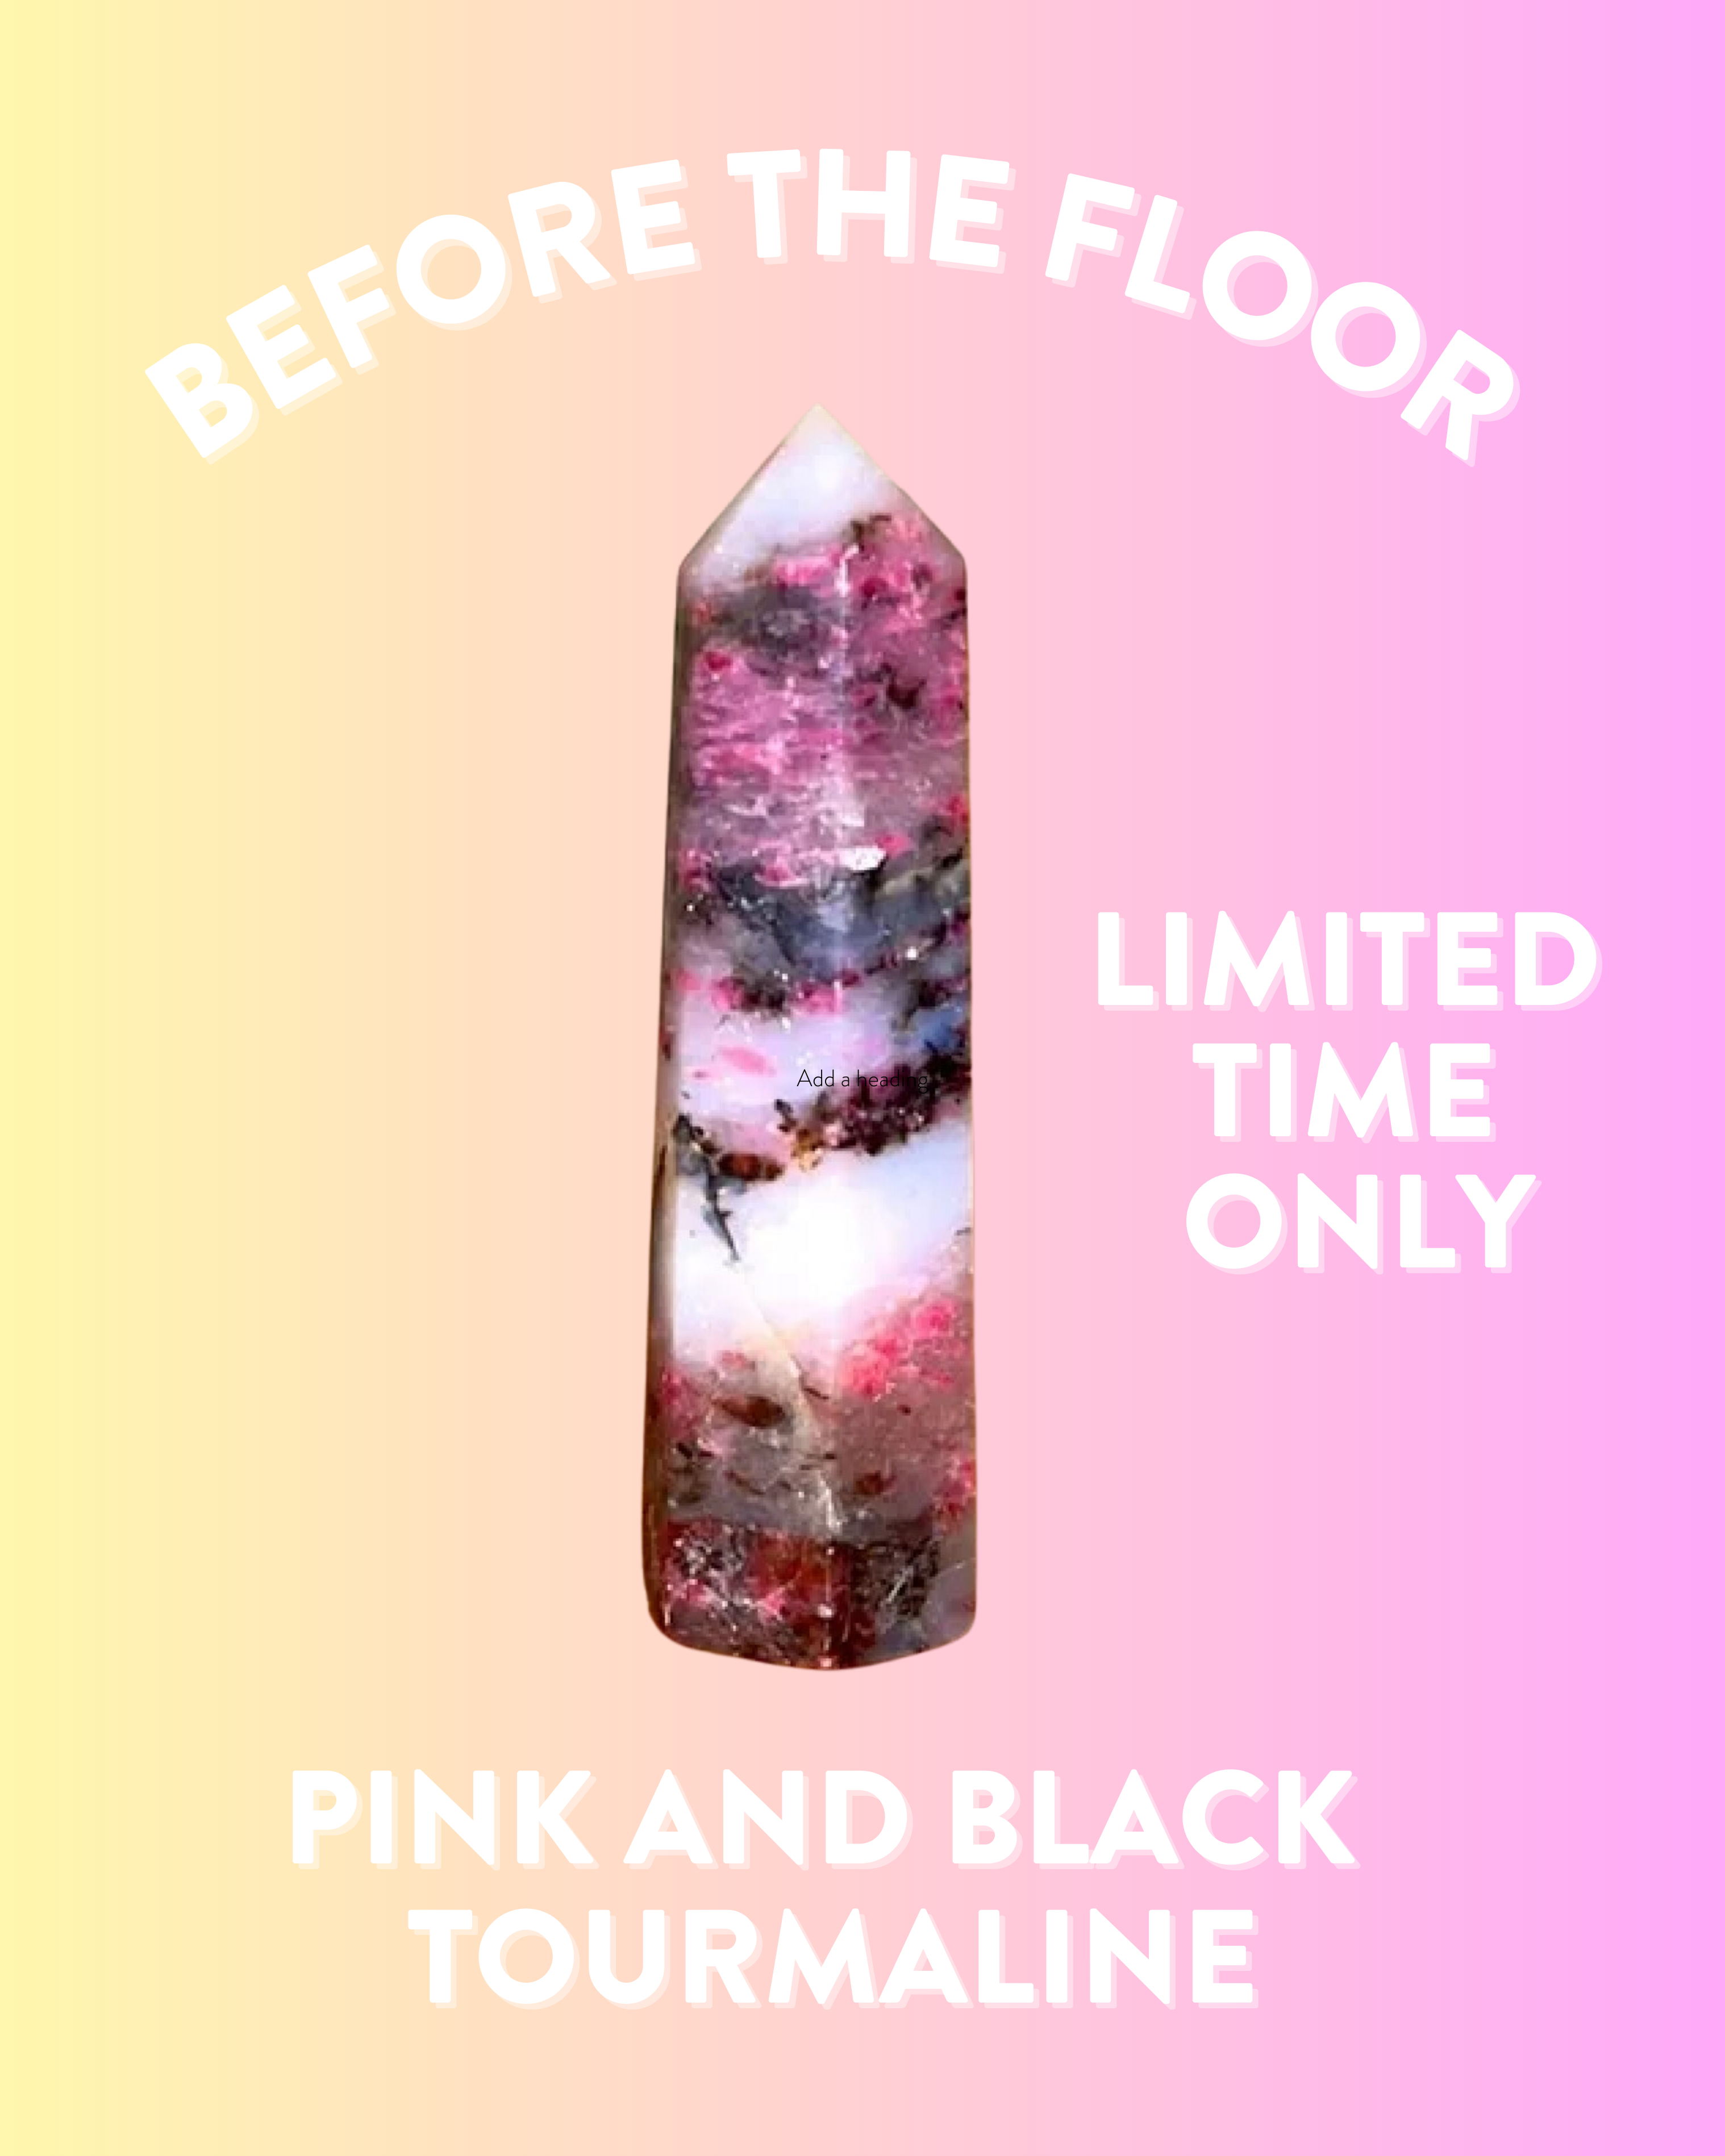 Pink and Black Tourmaline Point - Before the Floor